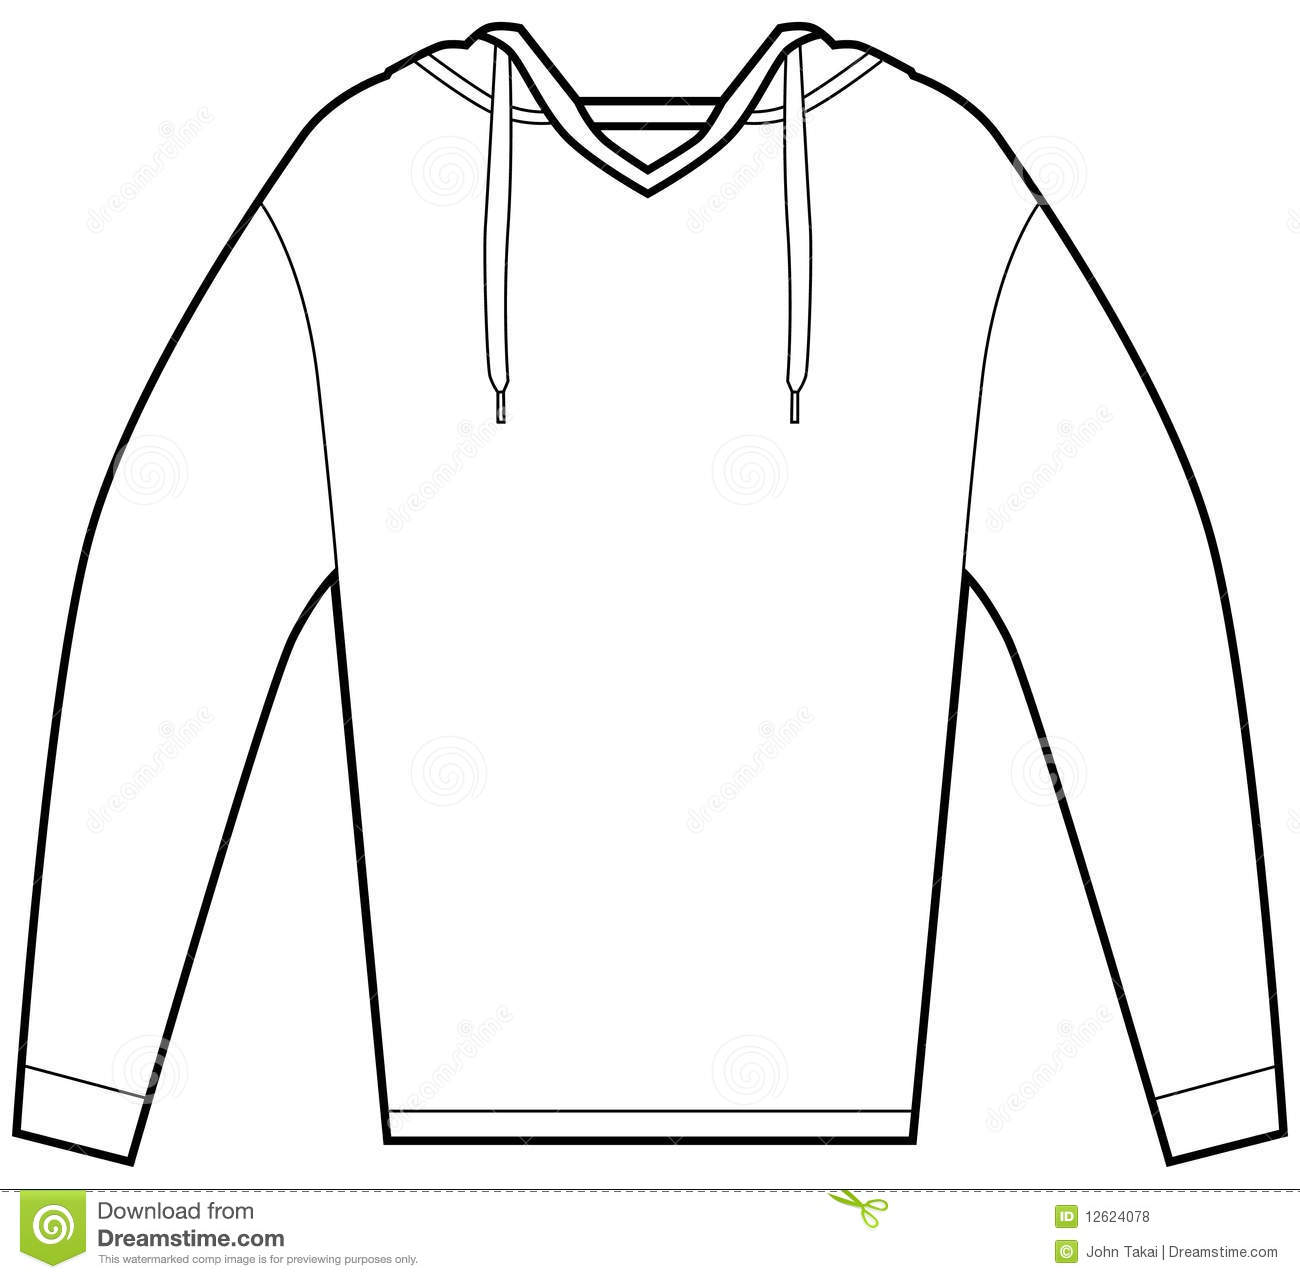 Hooded Pullover Shirt Royalty Free Stock Photos   Image  12624078